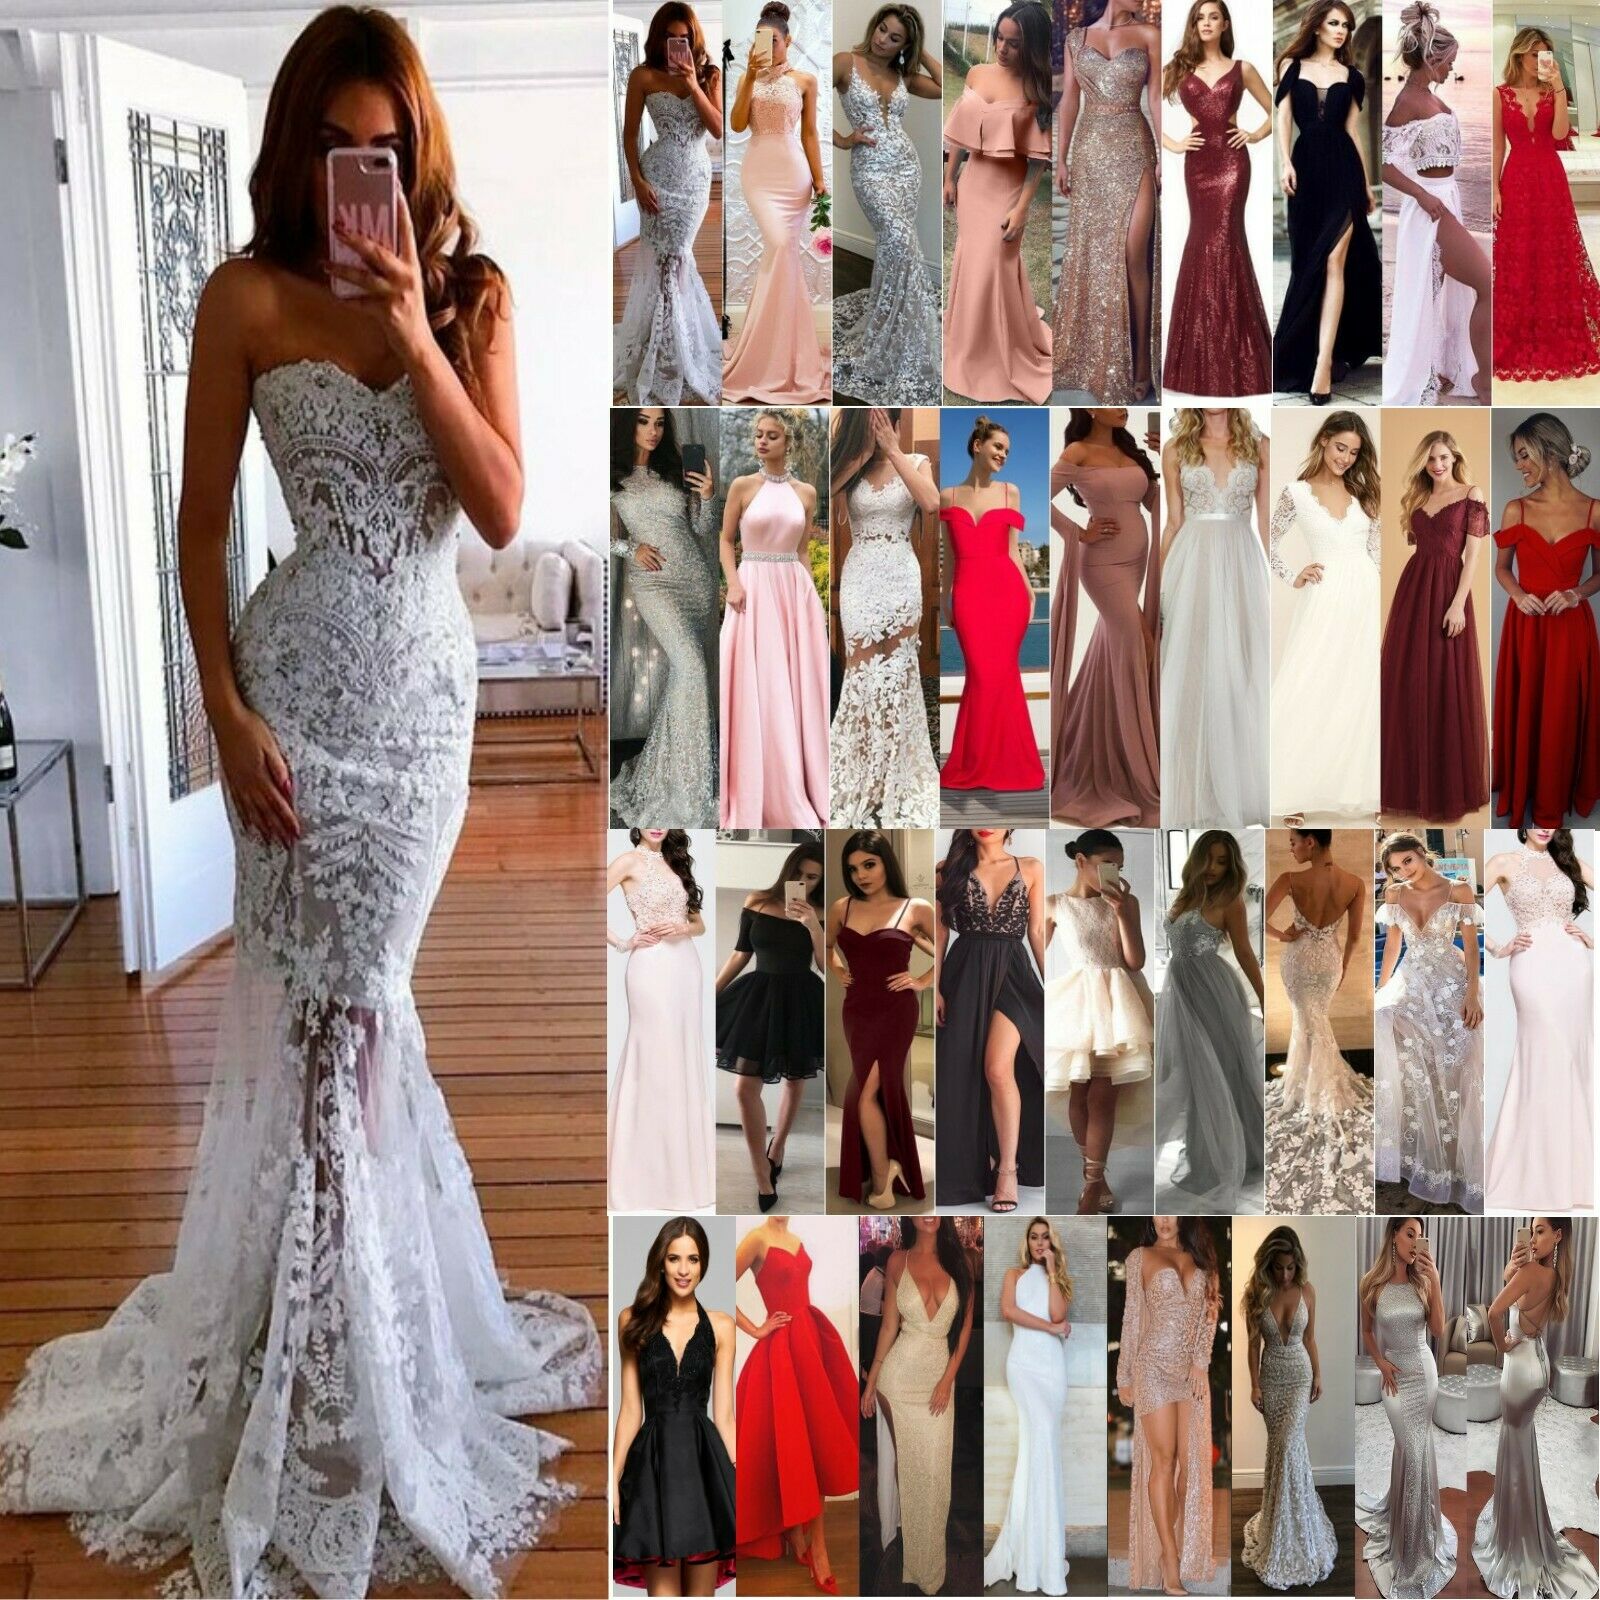 Women Bridesmaid Sequin Dress Wedding Maxi Dresses Long Party Evening Prom Gowns